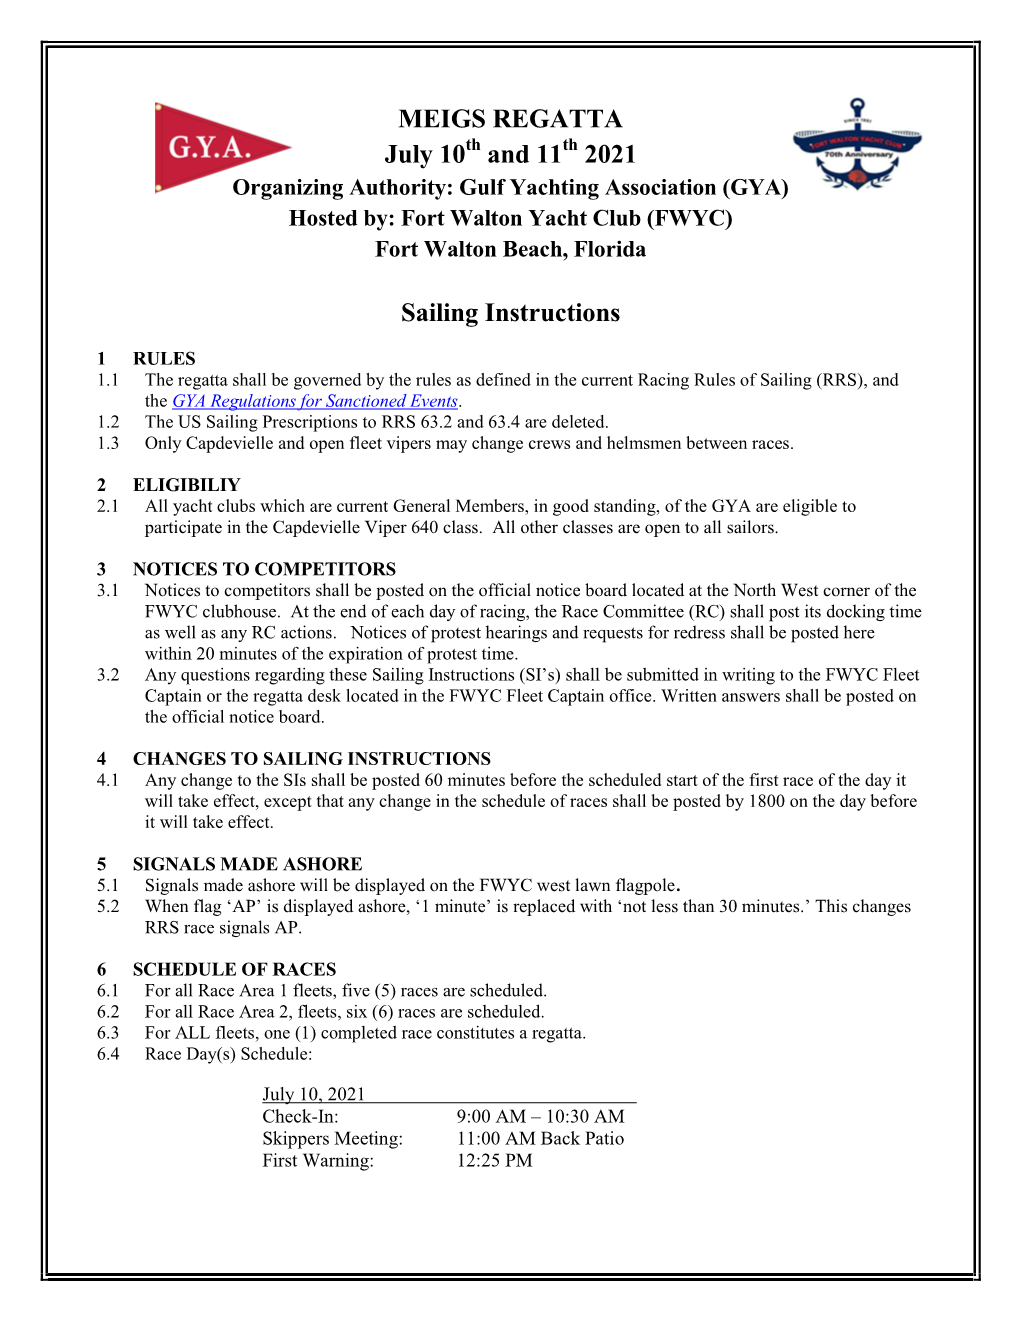 MEIGS REGATTA July 10 and 11 2021 Sailing Instructions